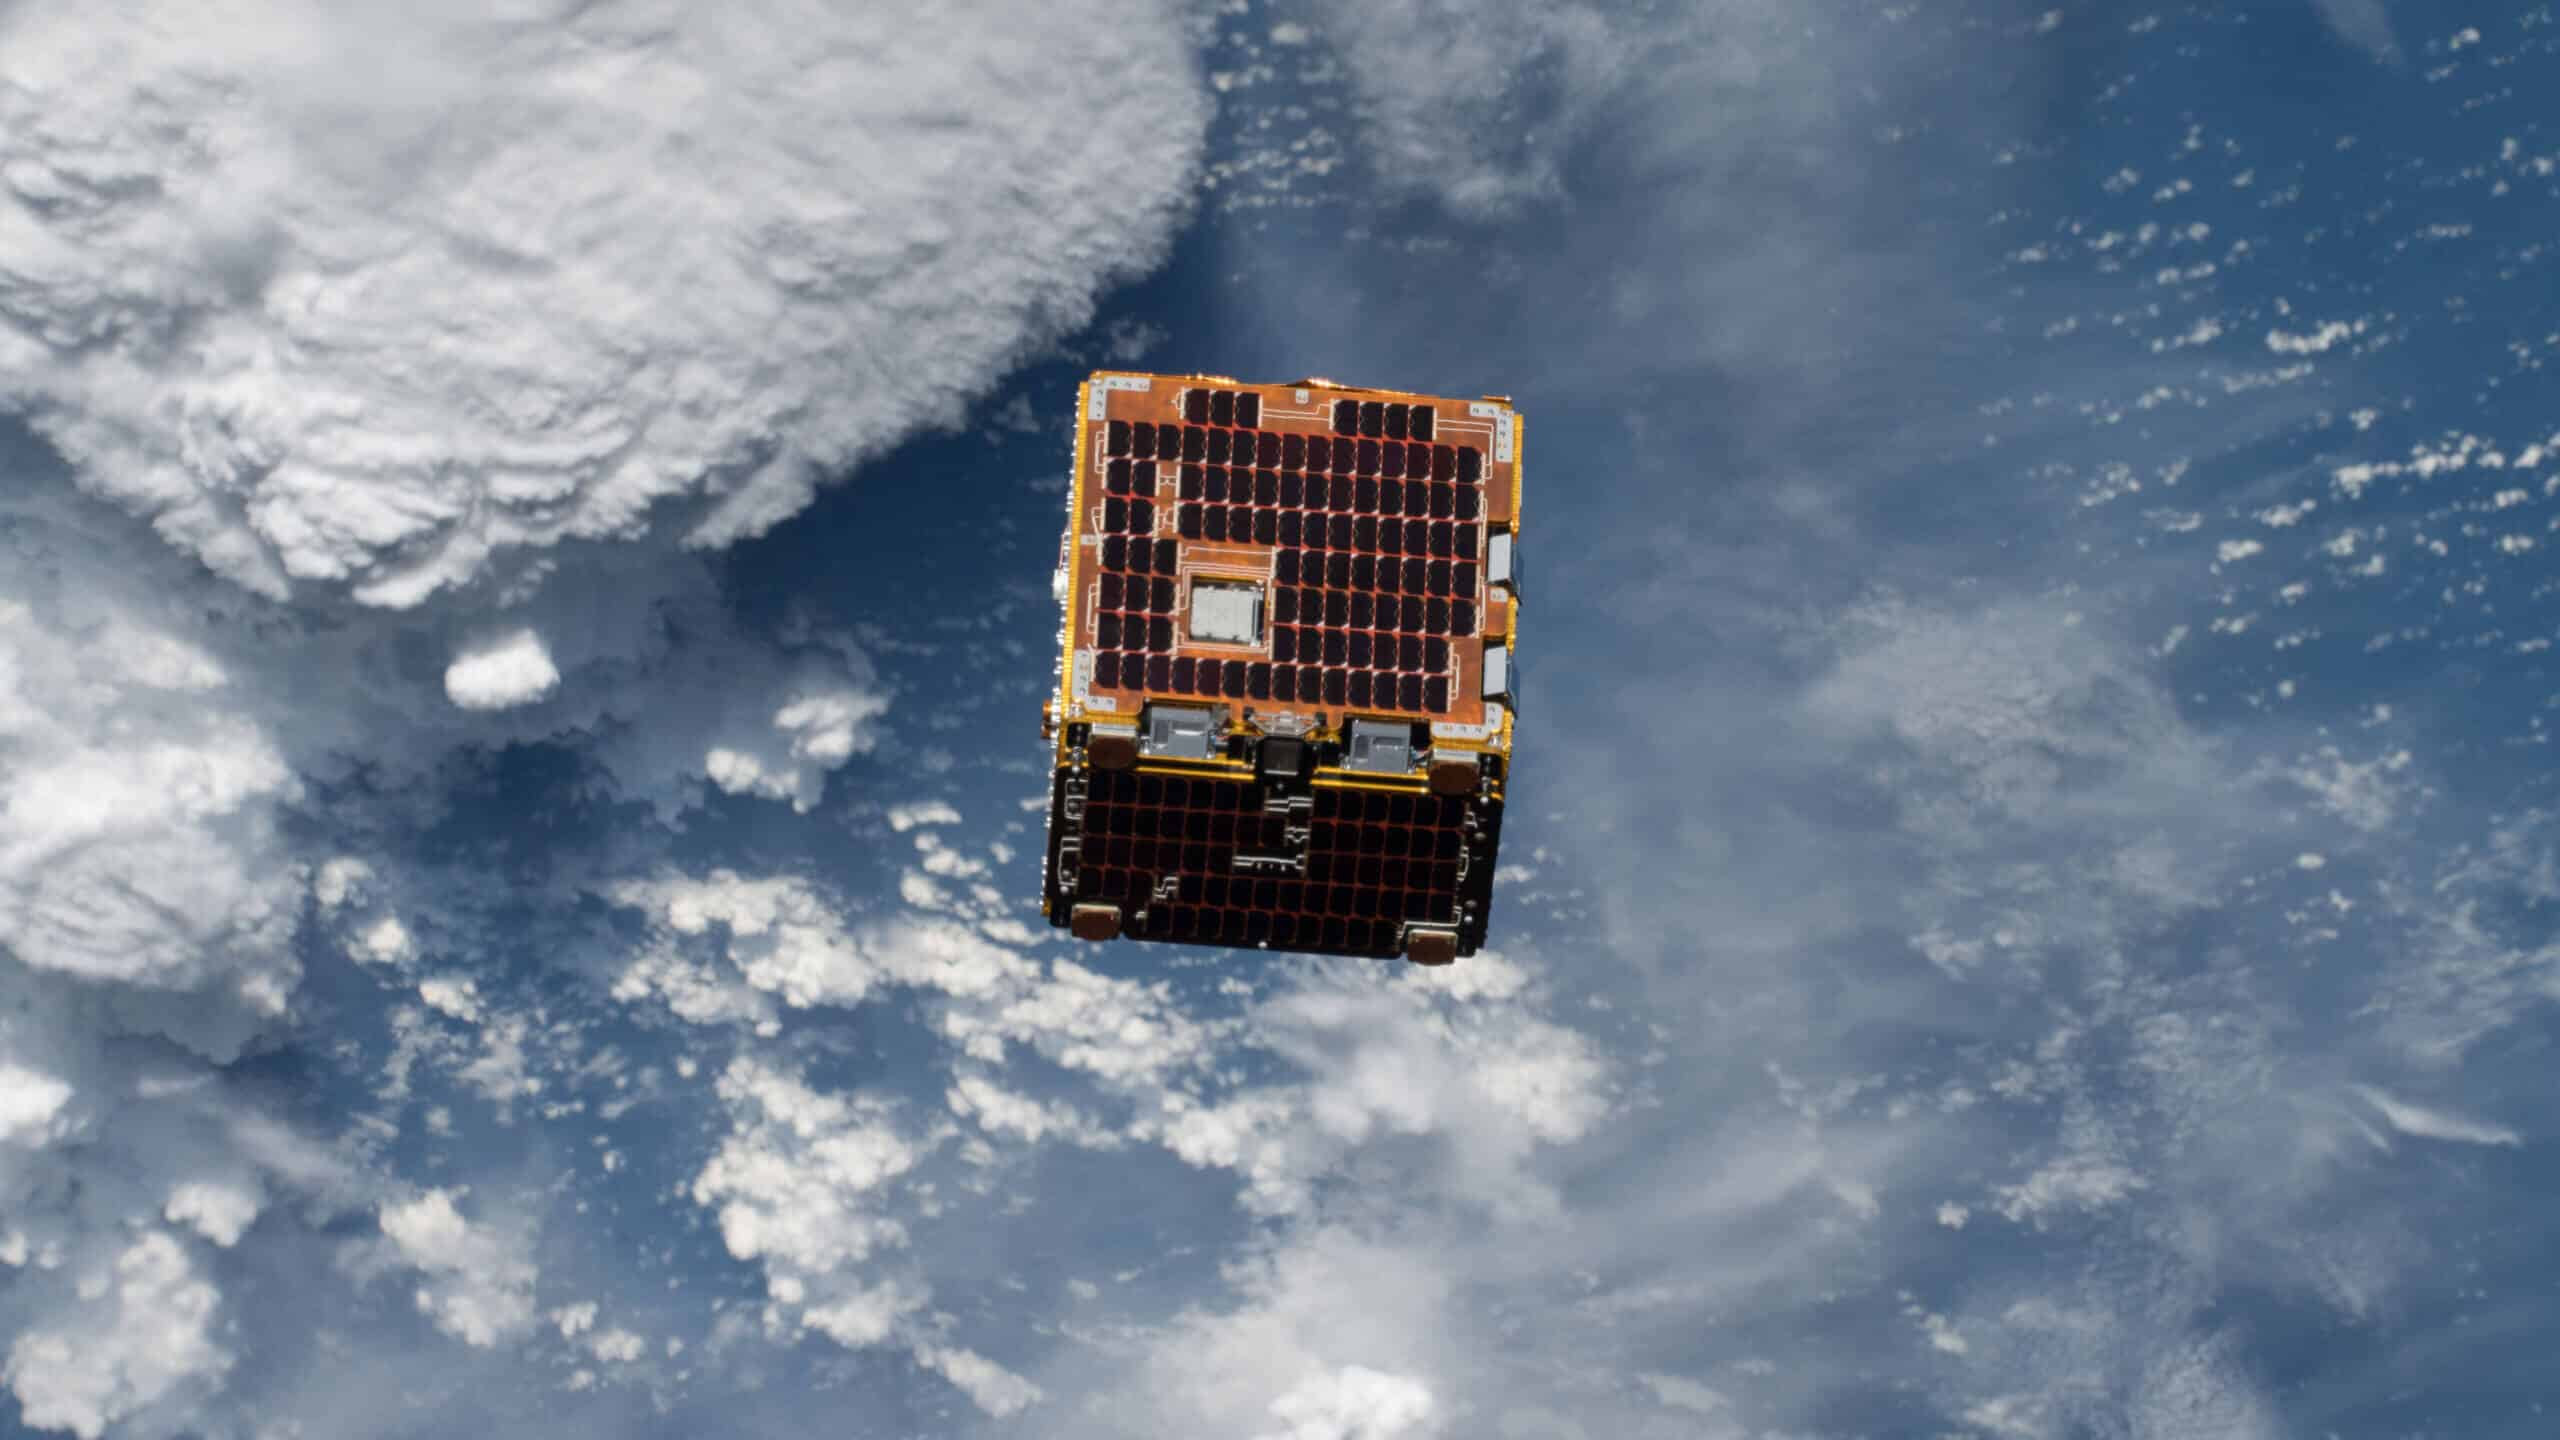 Smallsats reshaped the space industry